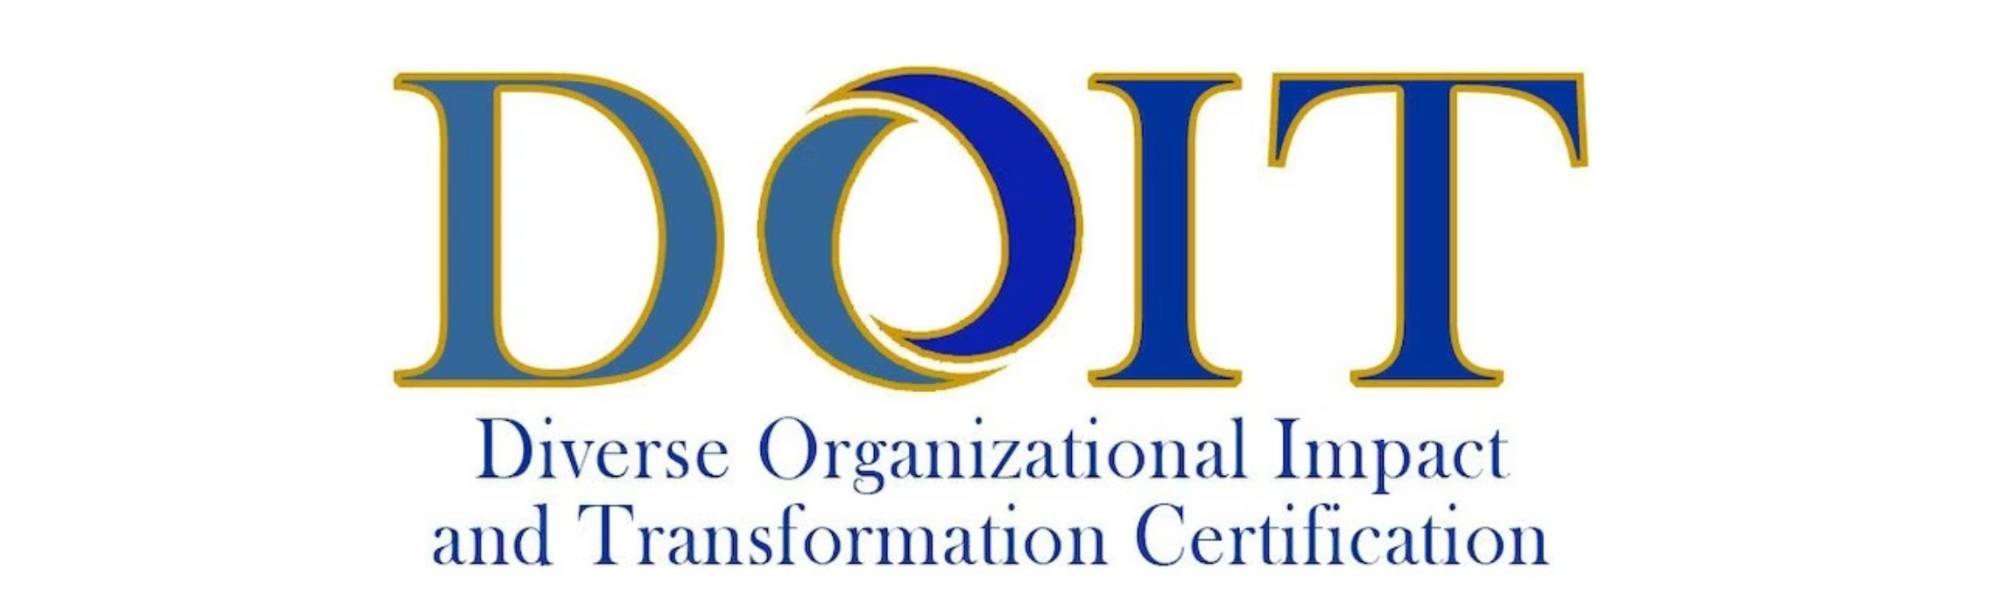 Diverse Organizational Impact and Transformation Certification